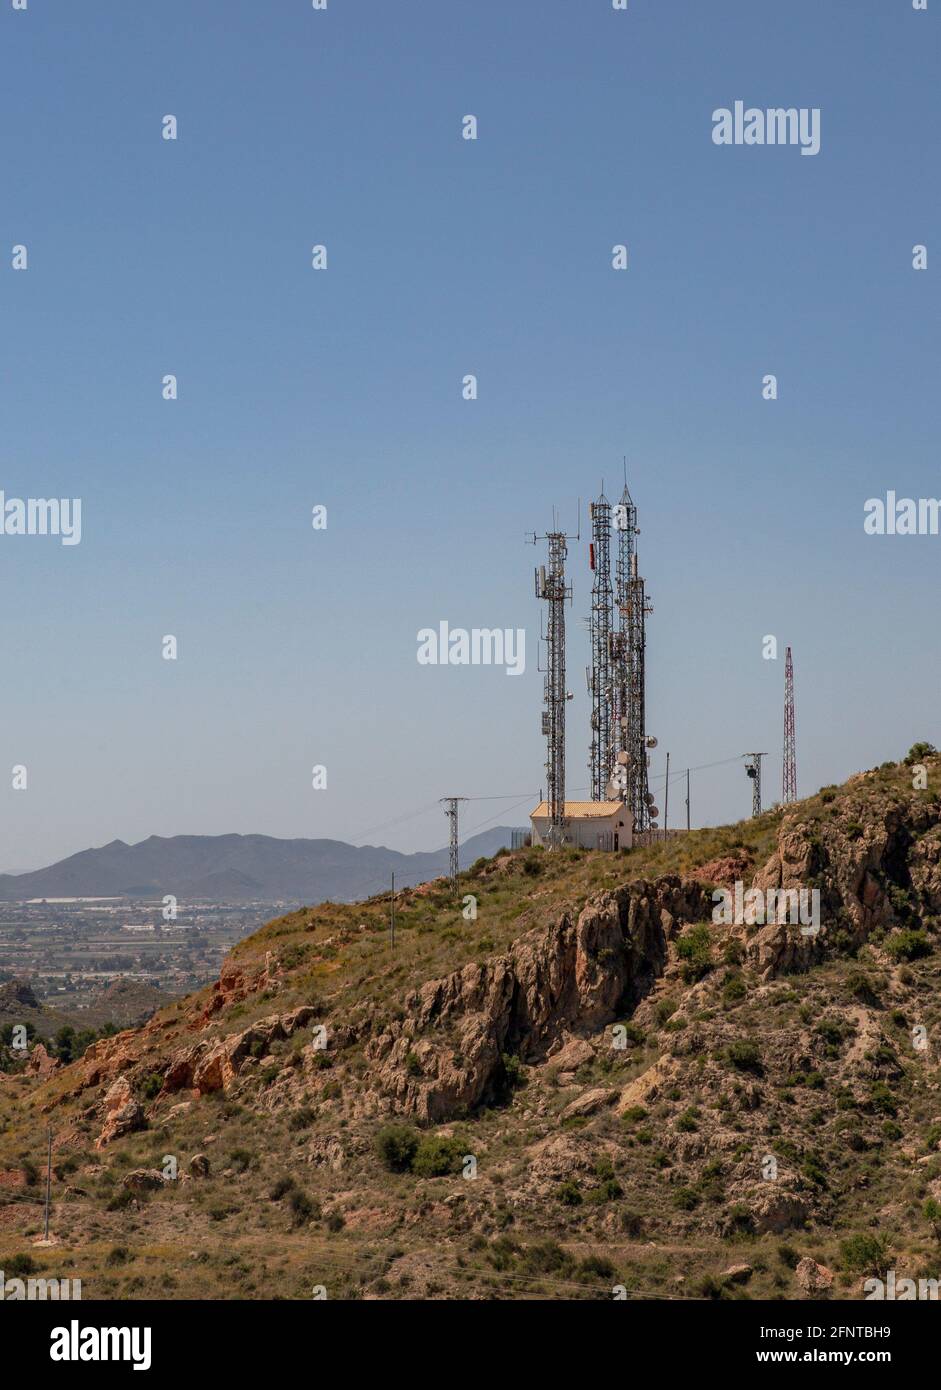 Antenna telephone and communication towers on the background of a beautiful mountain and a beautiful sky. Can be used as a background or landscape. Stock Photo